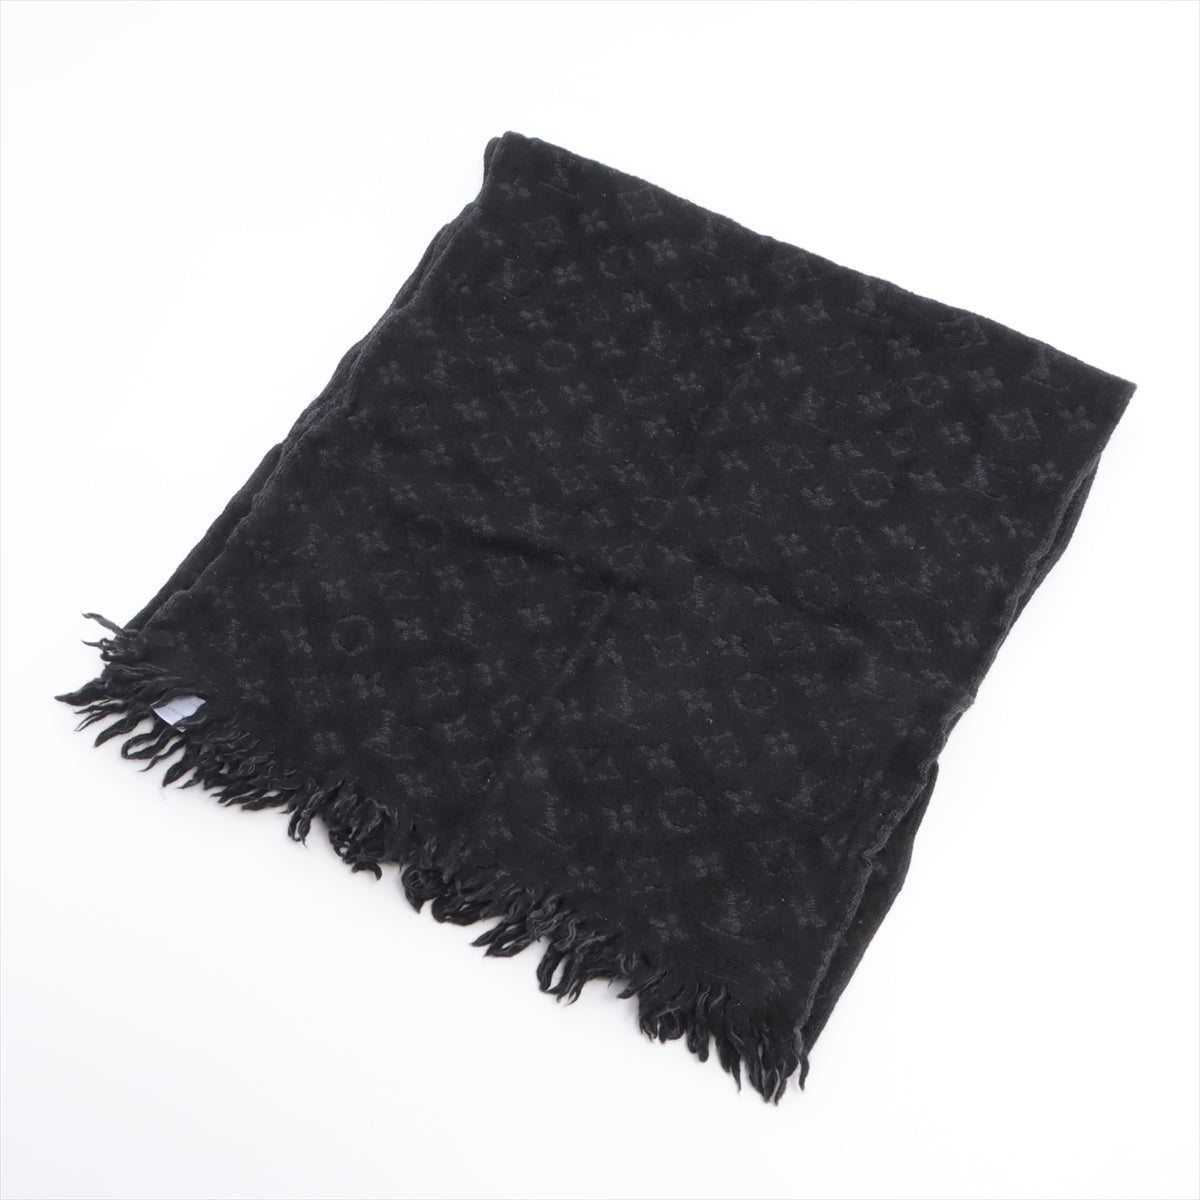 Louis Vuitton M70520 Echarpe Monogram Classic IS1128 Scarf Wool Black Wears Wrinkled Lint on fabric Frayed  Yes